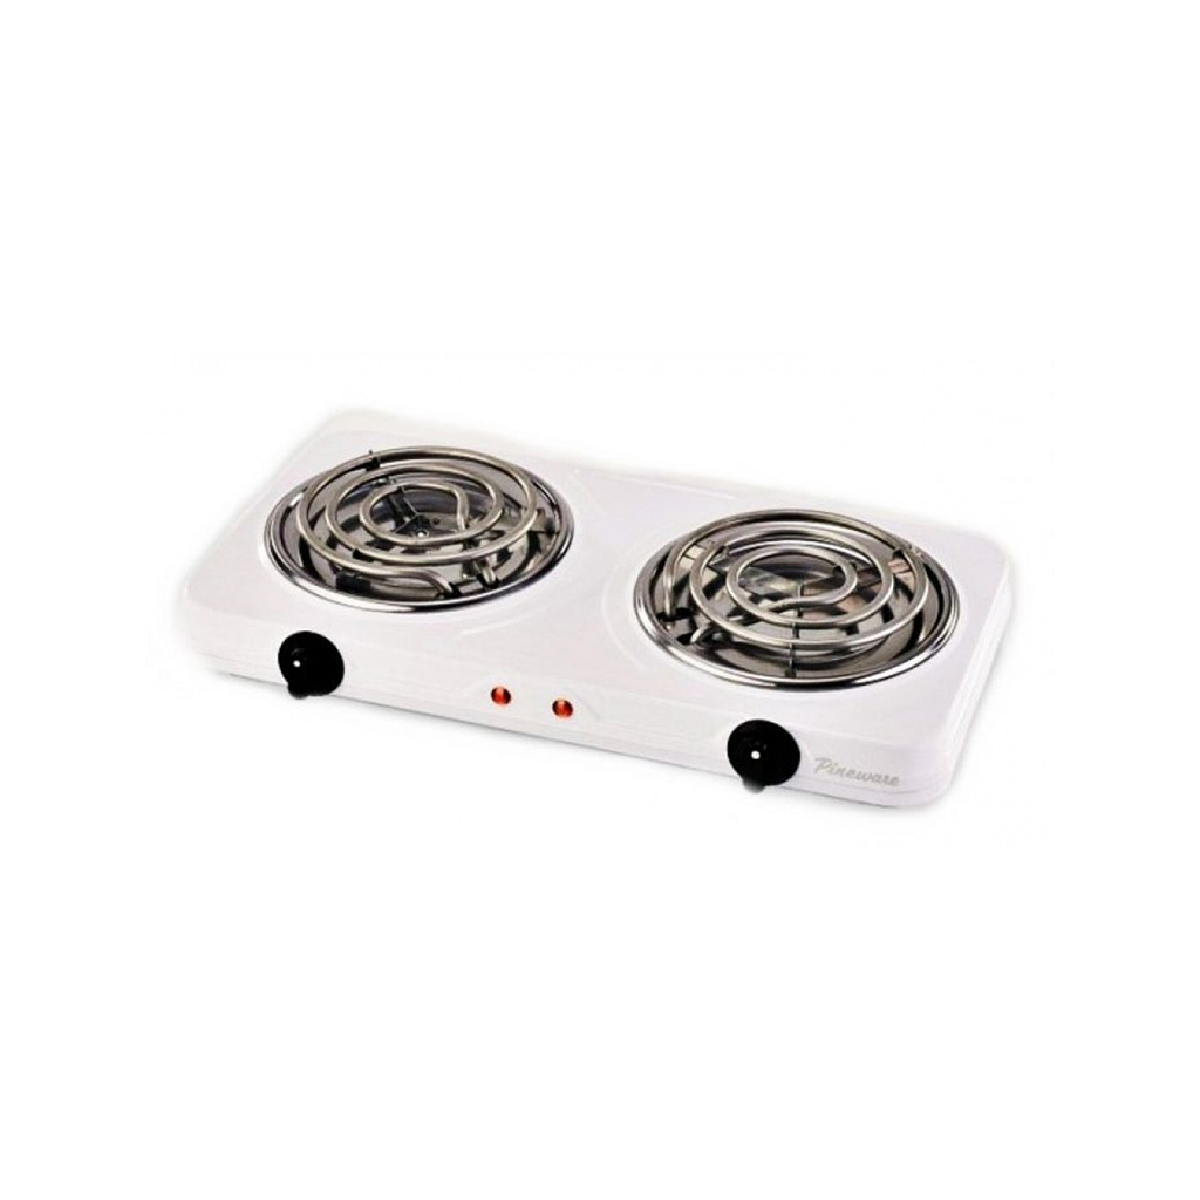 Pineware 2 Plate Spiral Compact Hot Plate